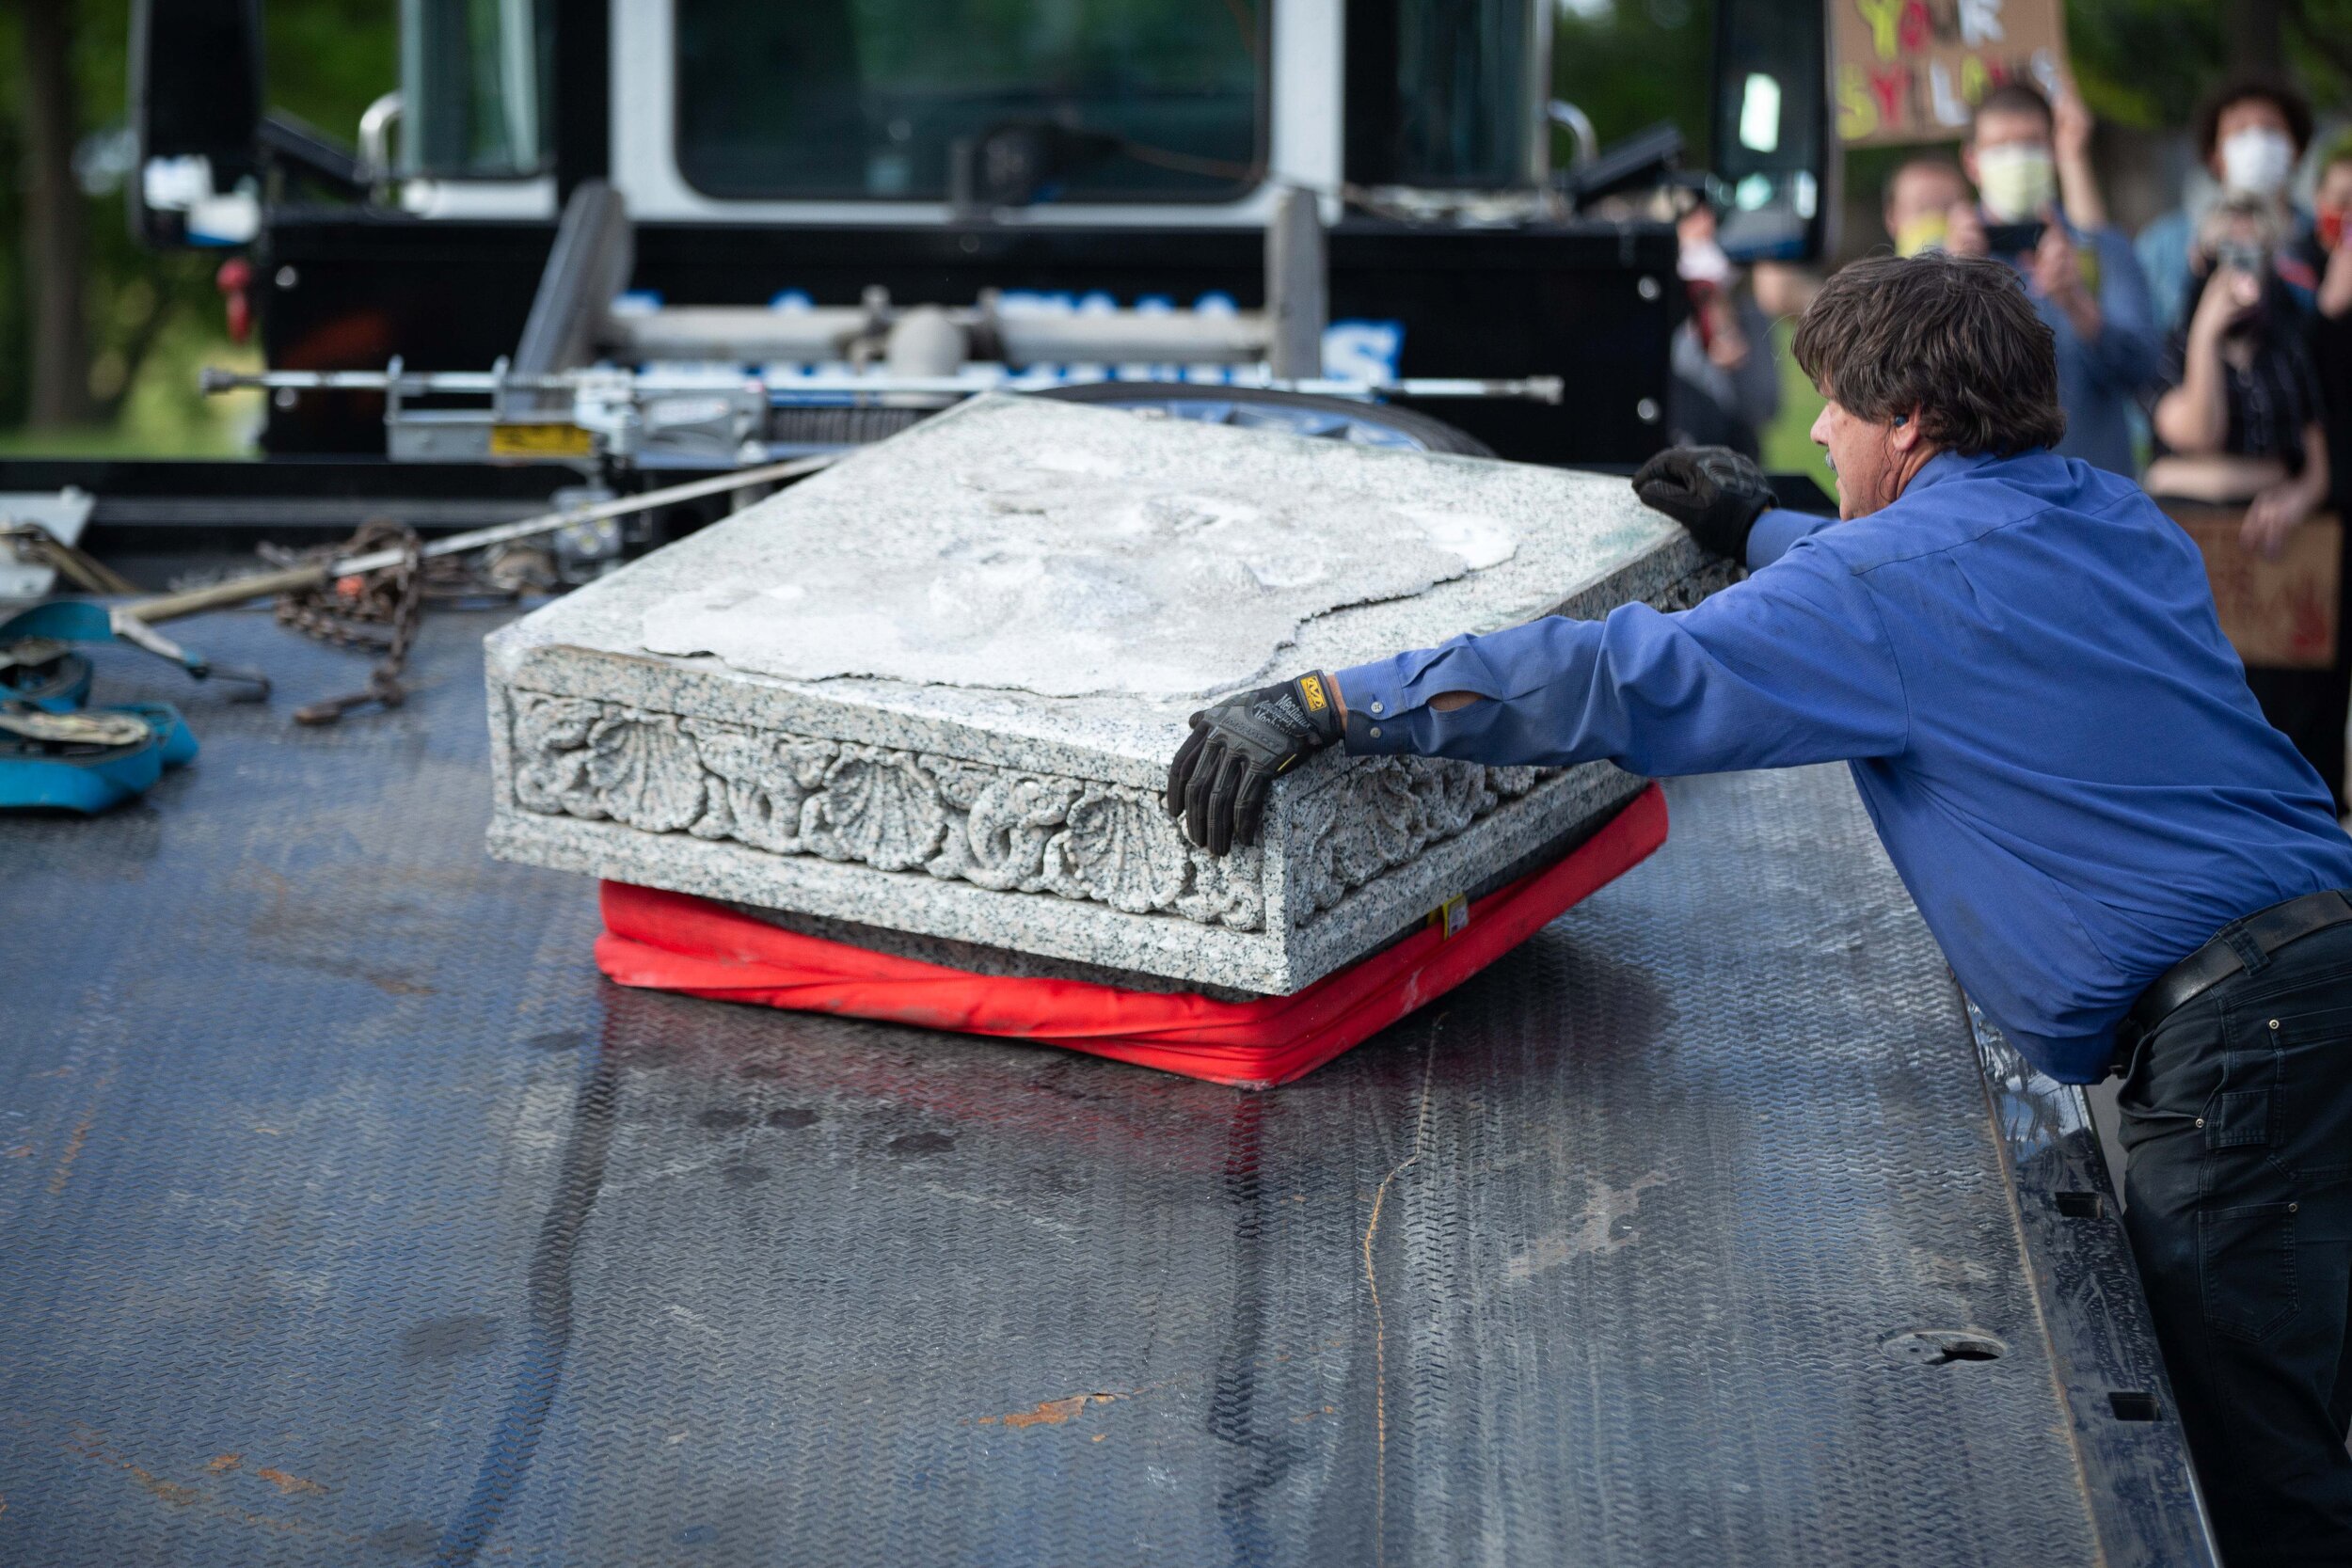  Workers put parts of the pedestal that once held the statue of Christopher Columbus on the grounds of the State Capitol in Saint Paul, Minnesota on Jun 10, 2020. 